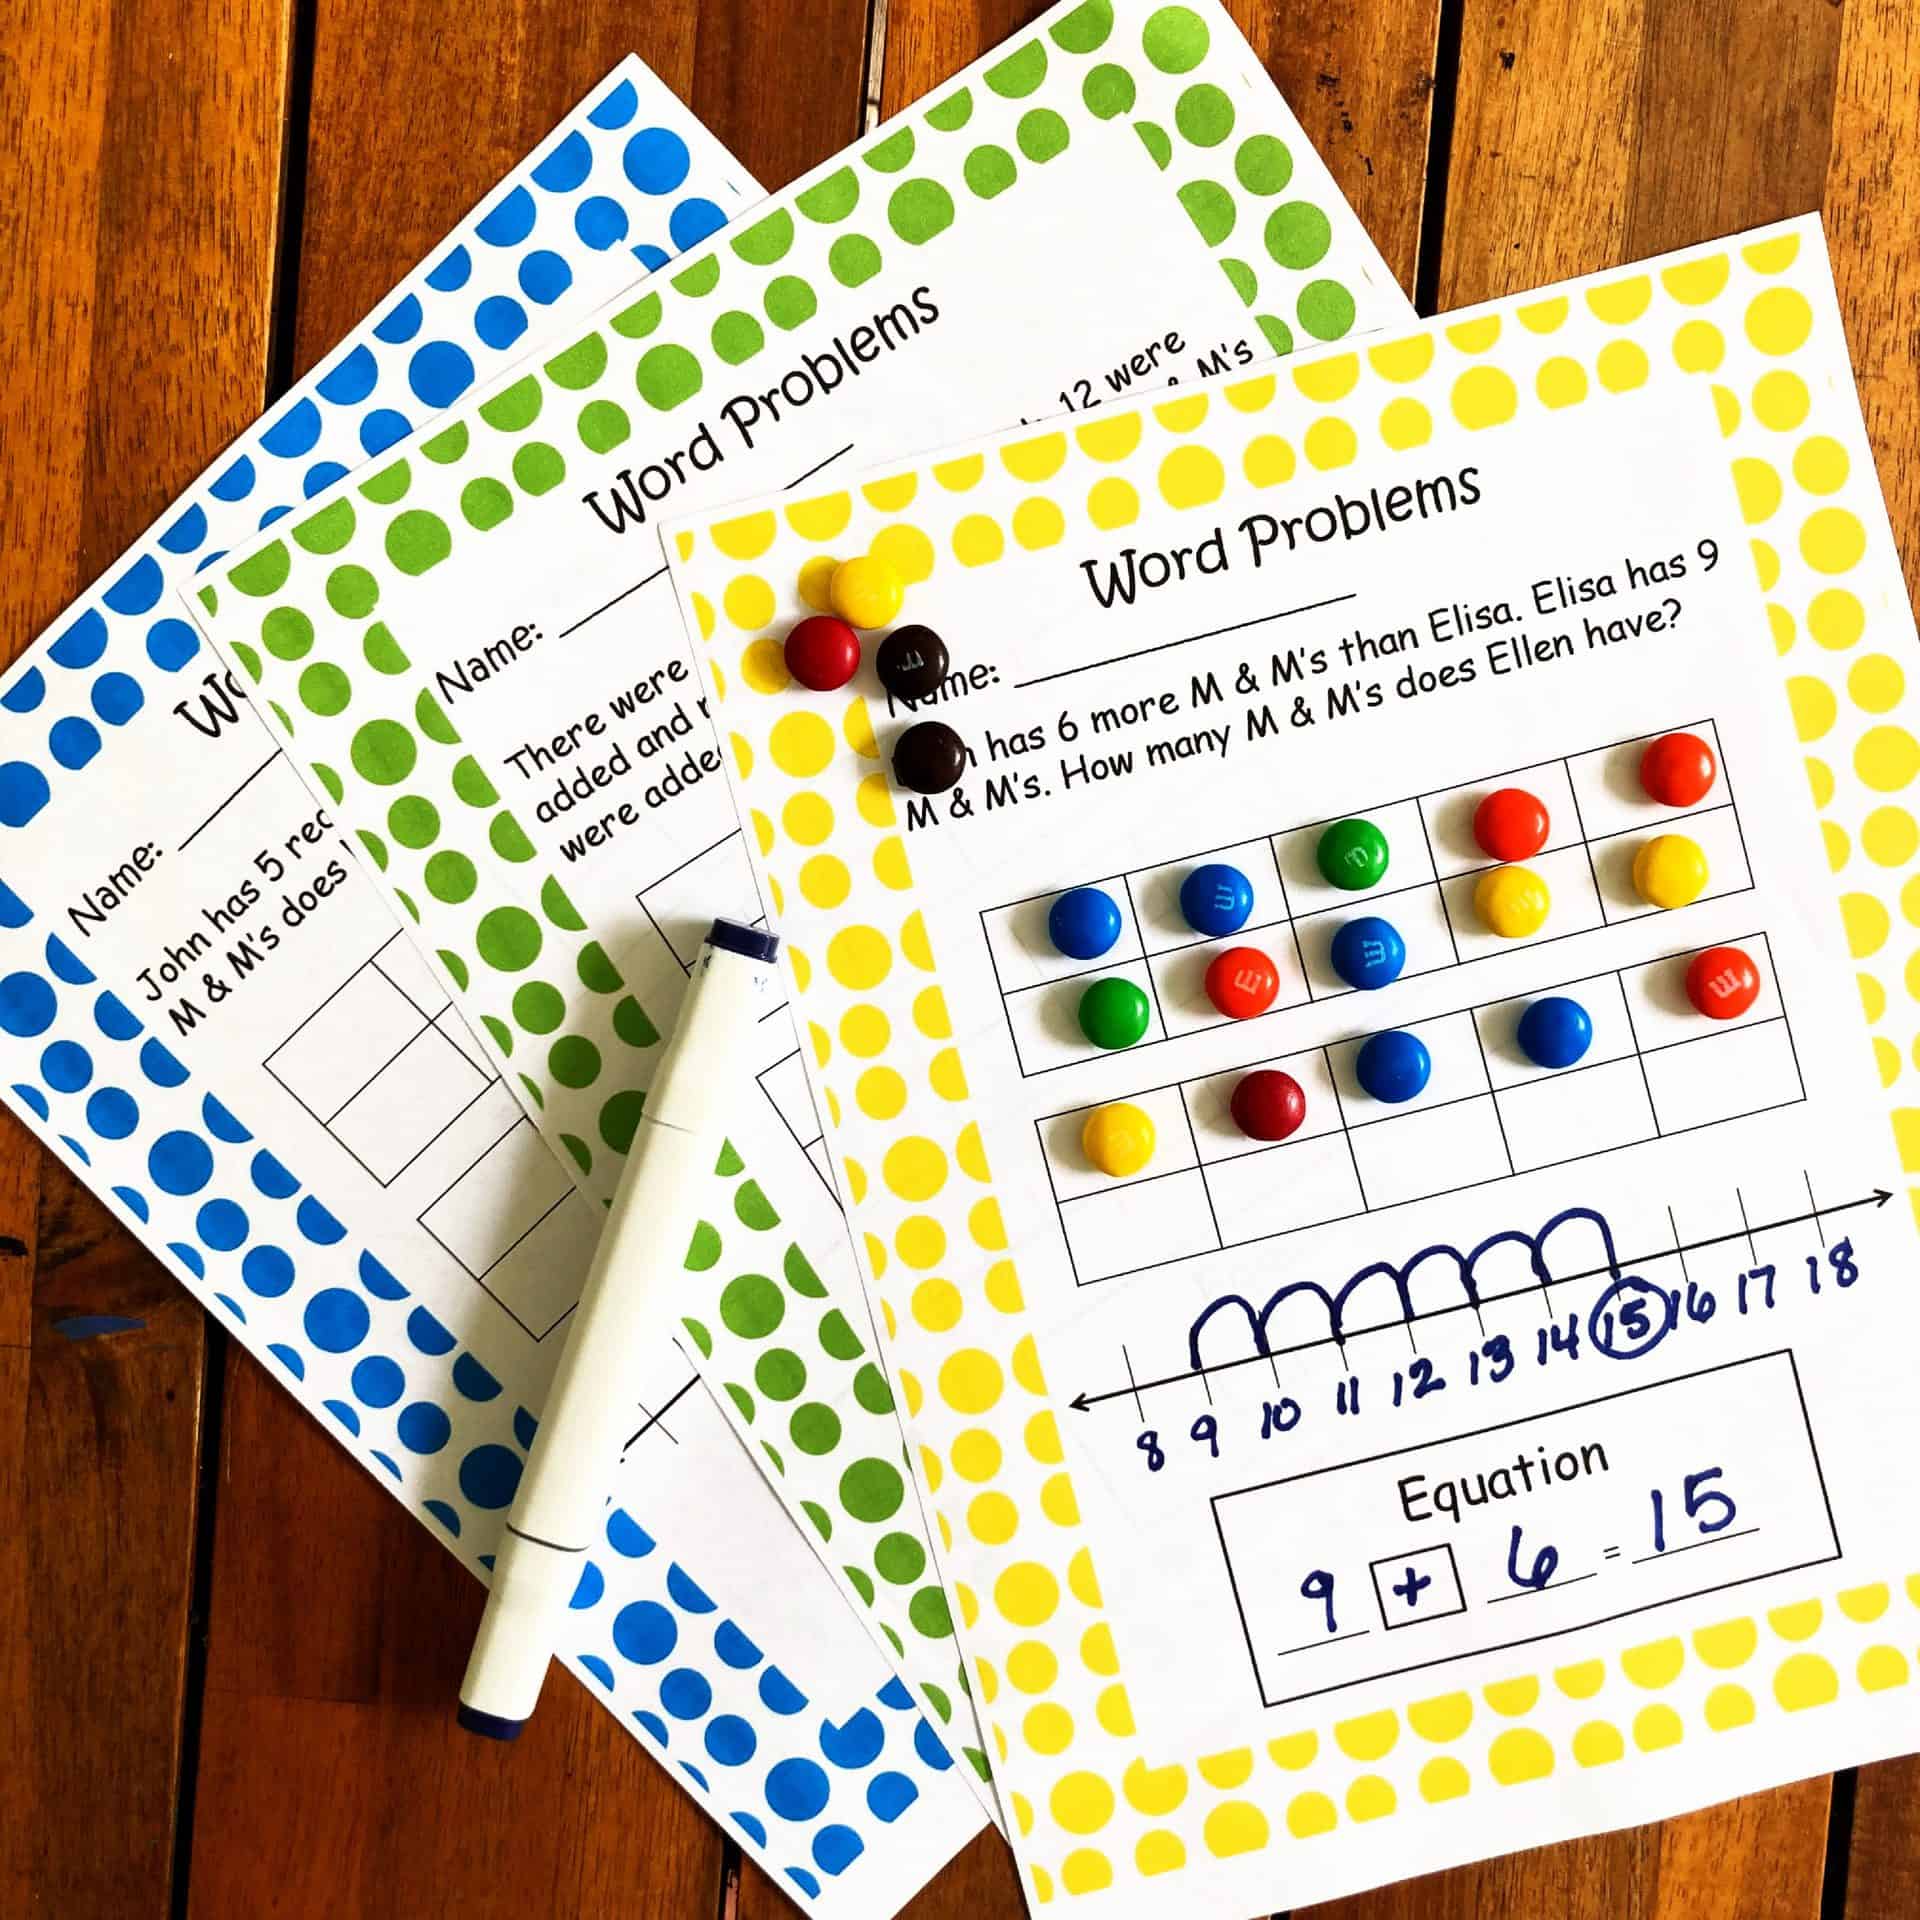 5 Free M & M Word Problems to Practice Adding and Subtracting Within 20